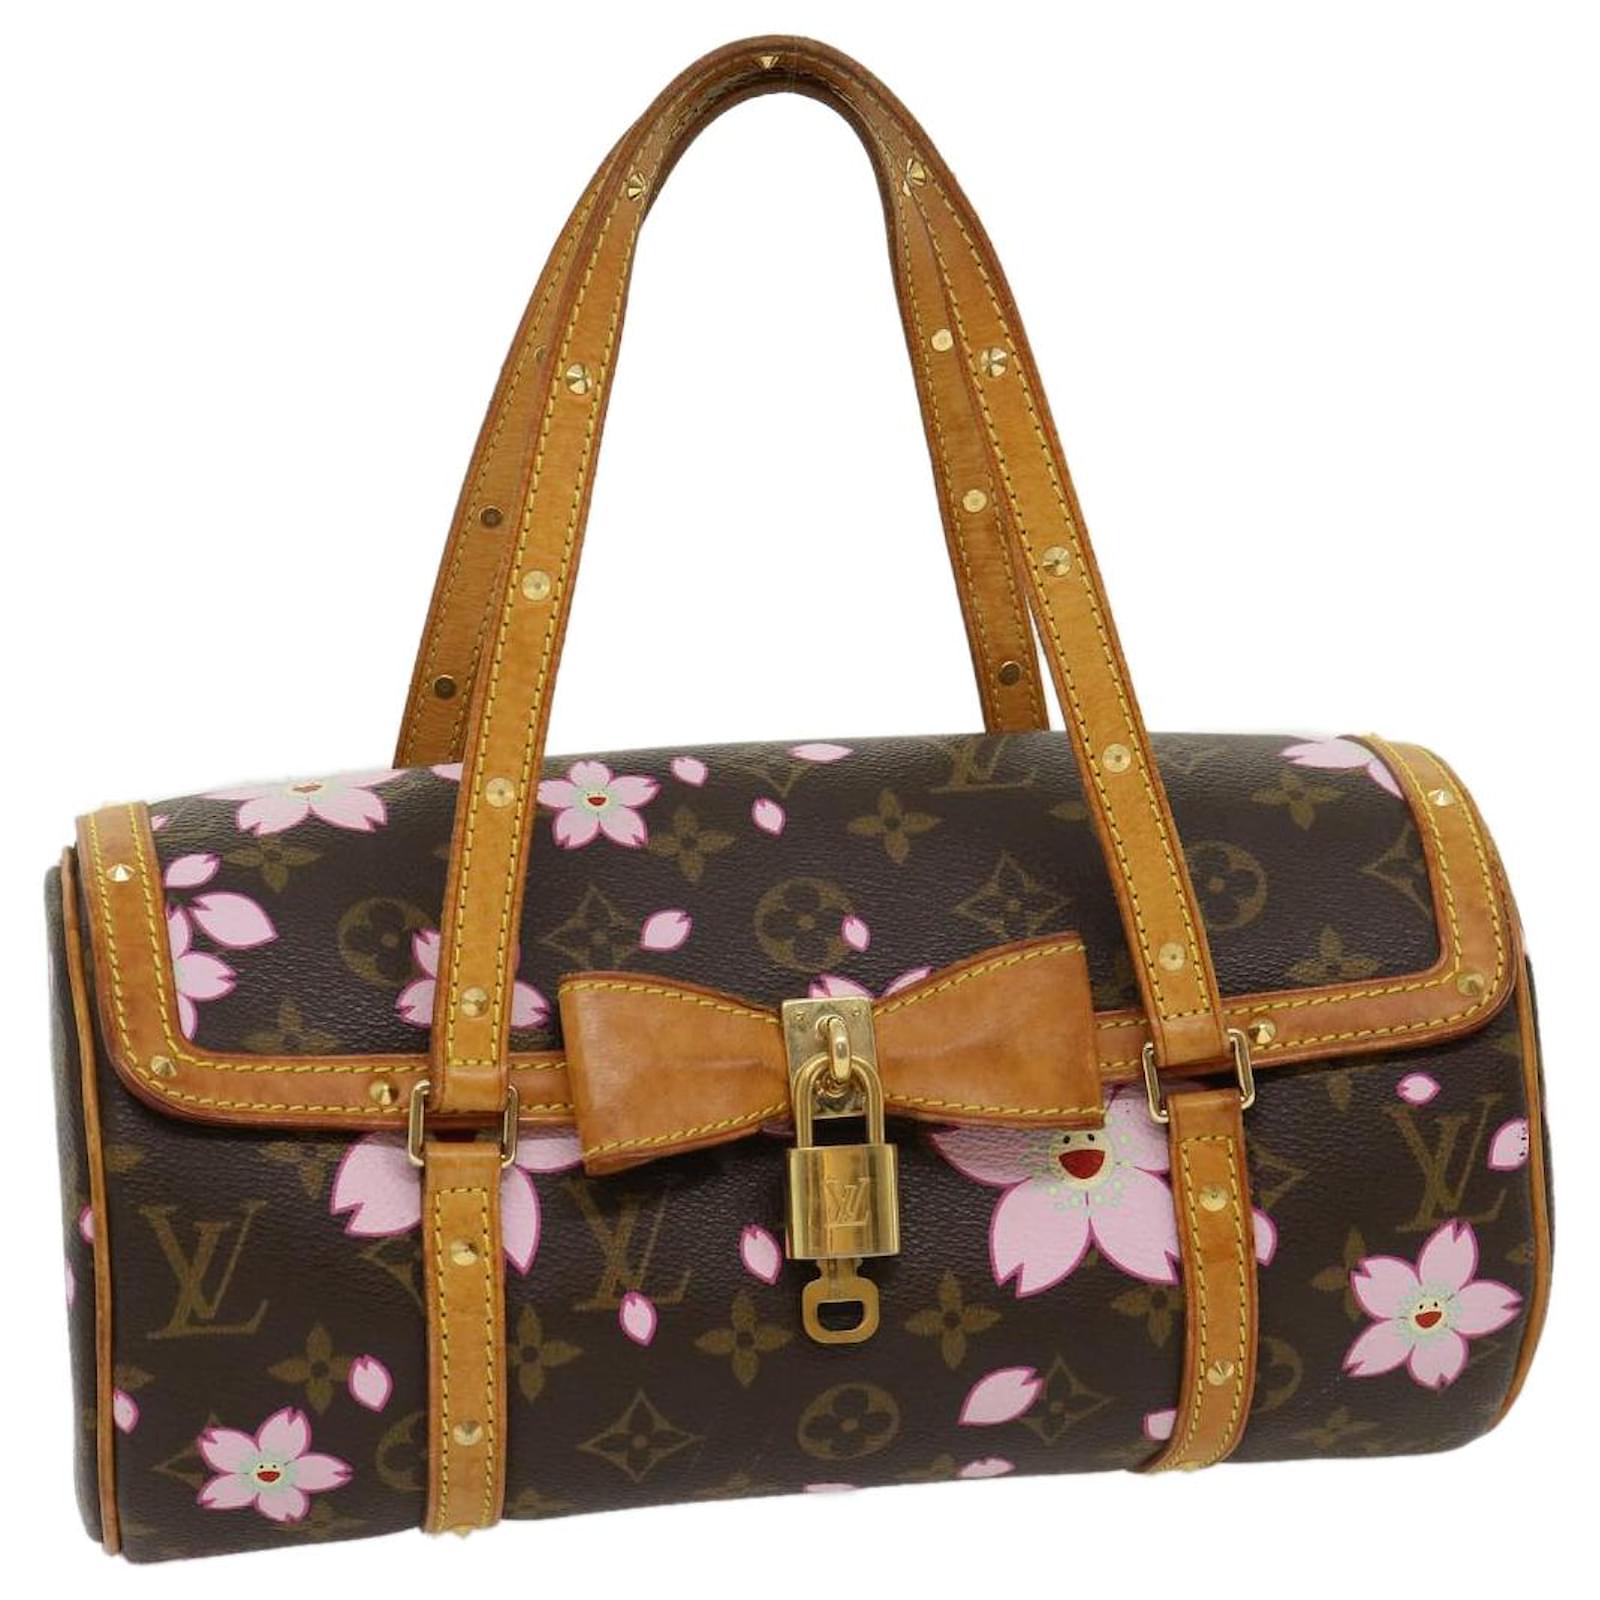 LOUIS VUITTON BAG 'Cherry Blossom' in Brown Monogram Canvas with